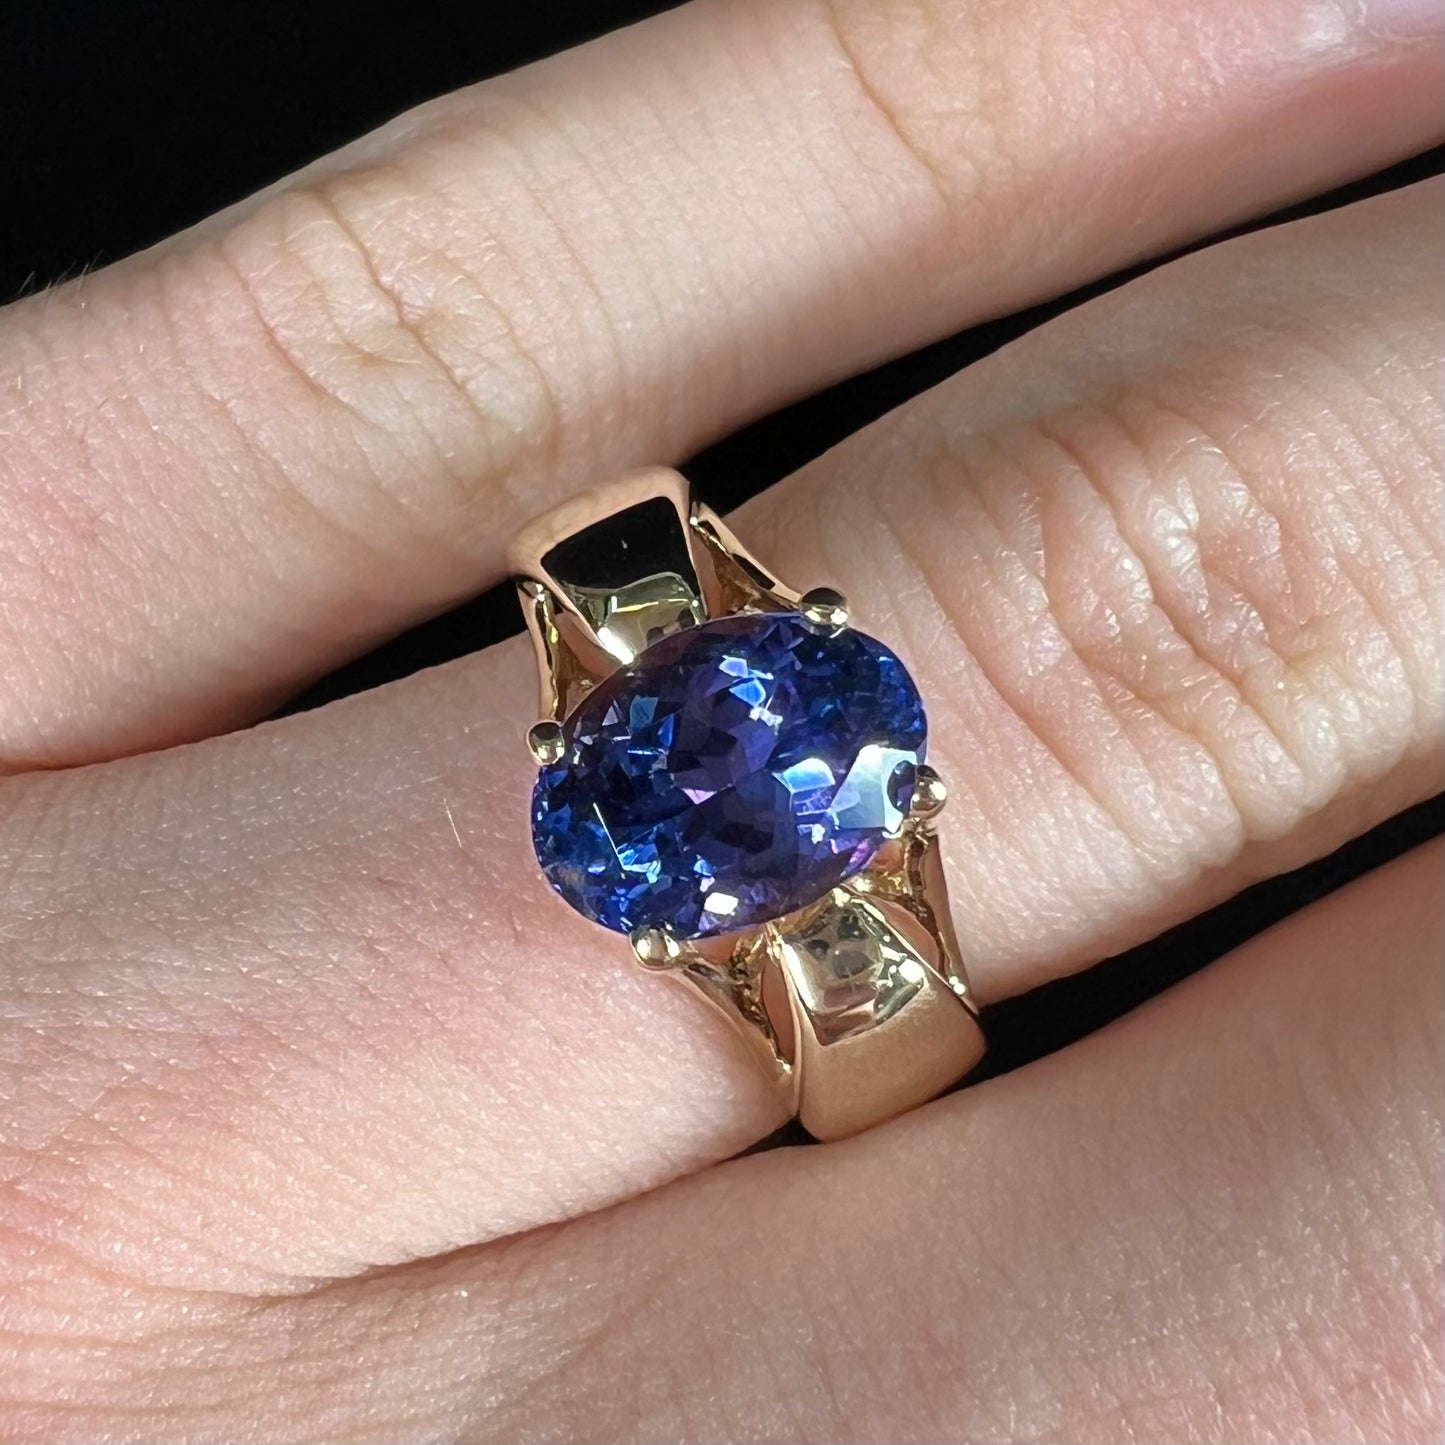 A ladies' oval cut tanzanite solitaire ring set in yellow gold.